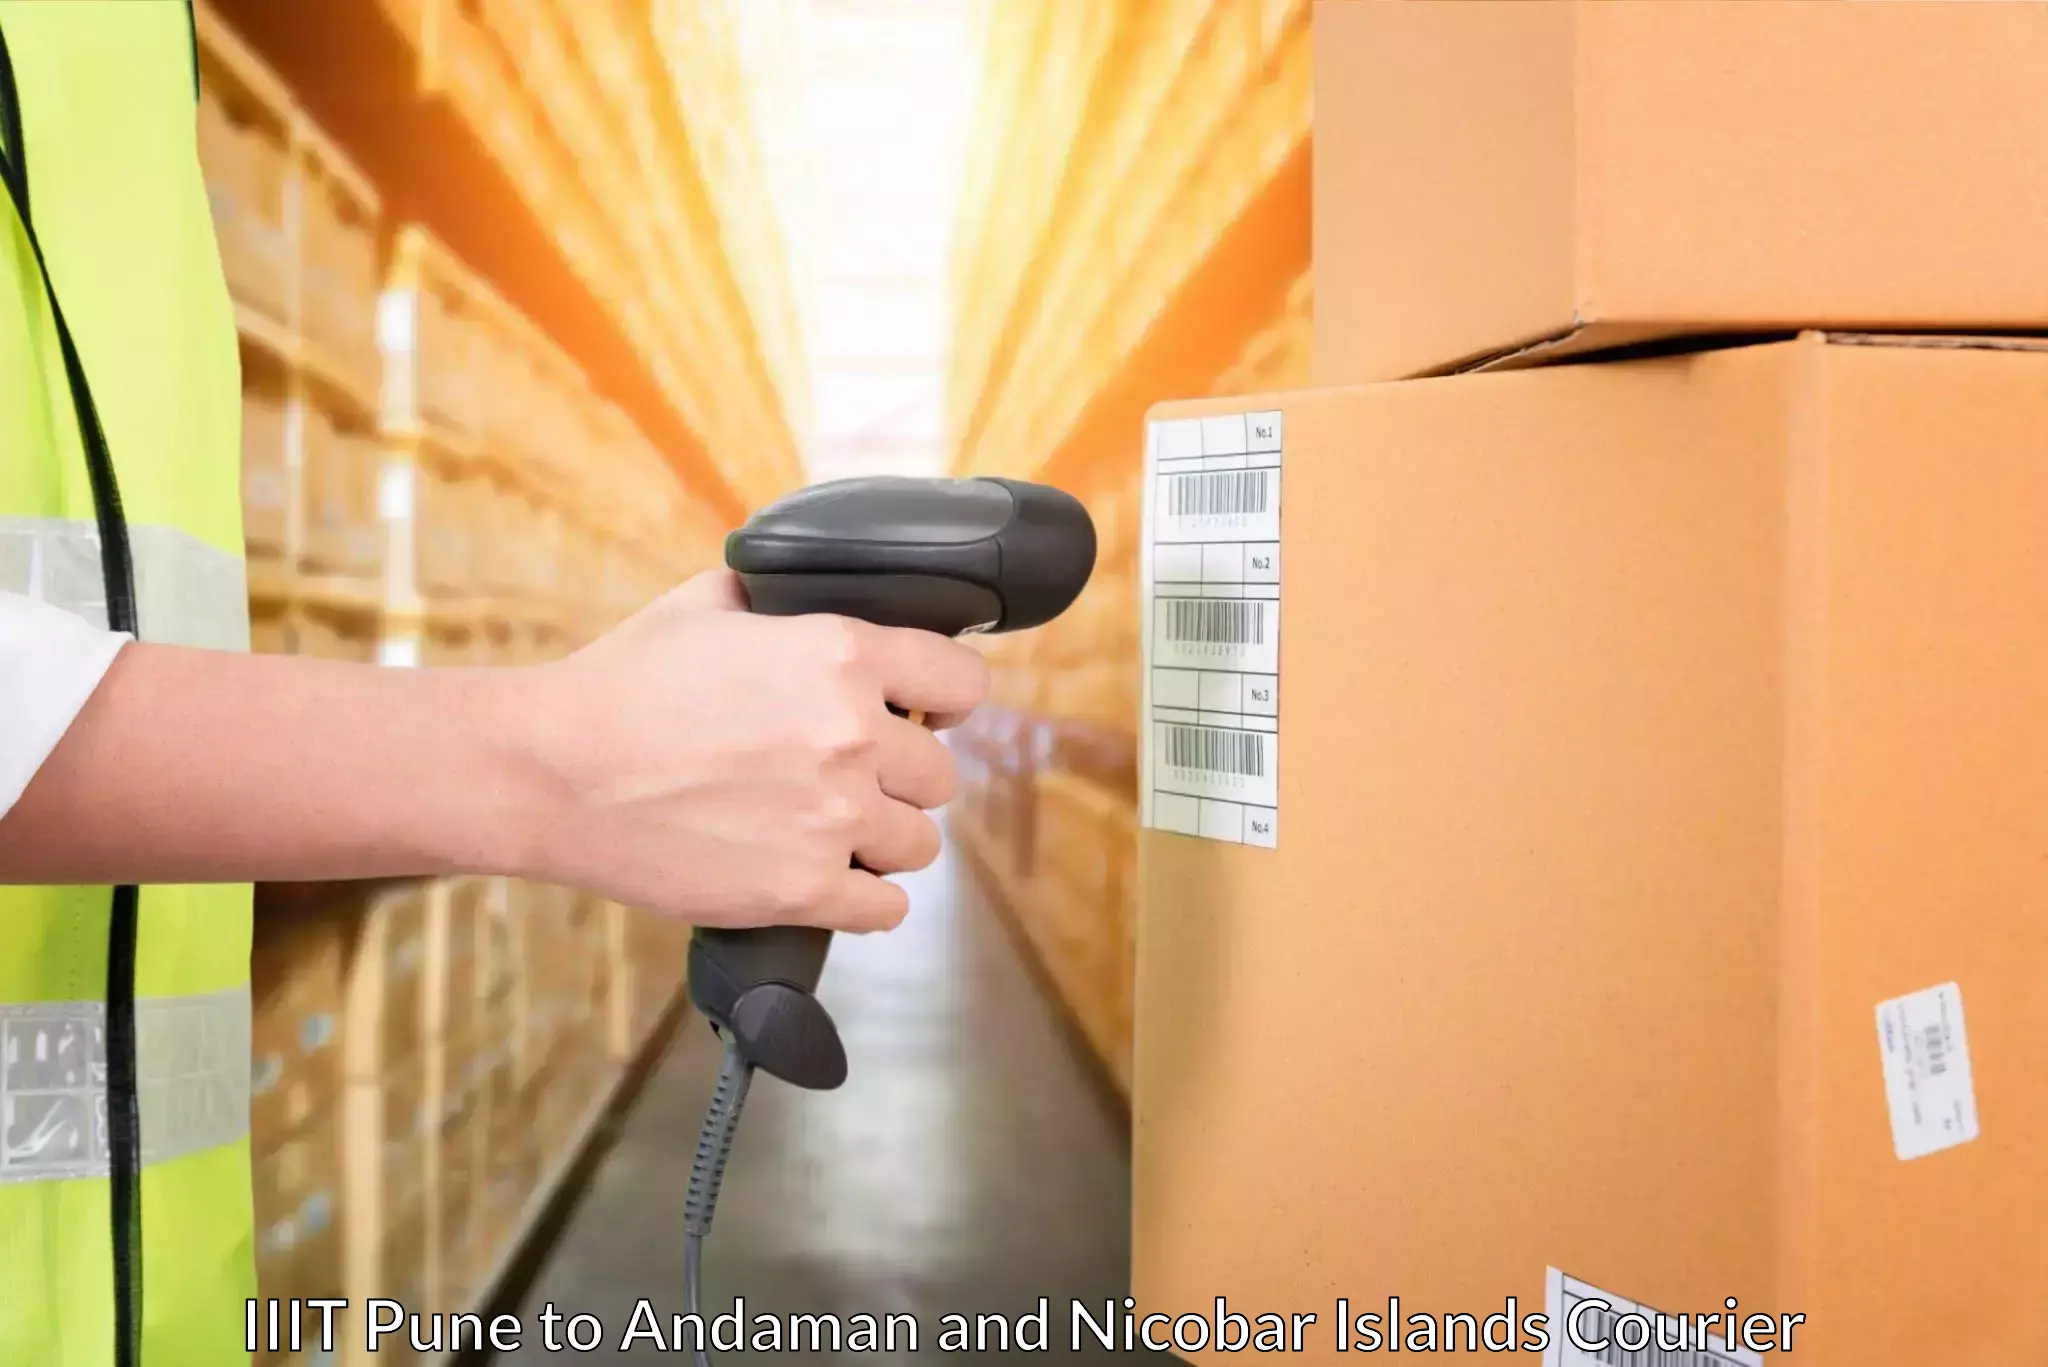 Express logistics providers IIIT Pune to North And Middle Andaman